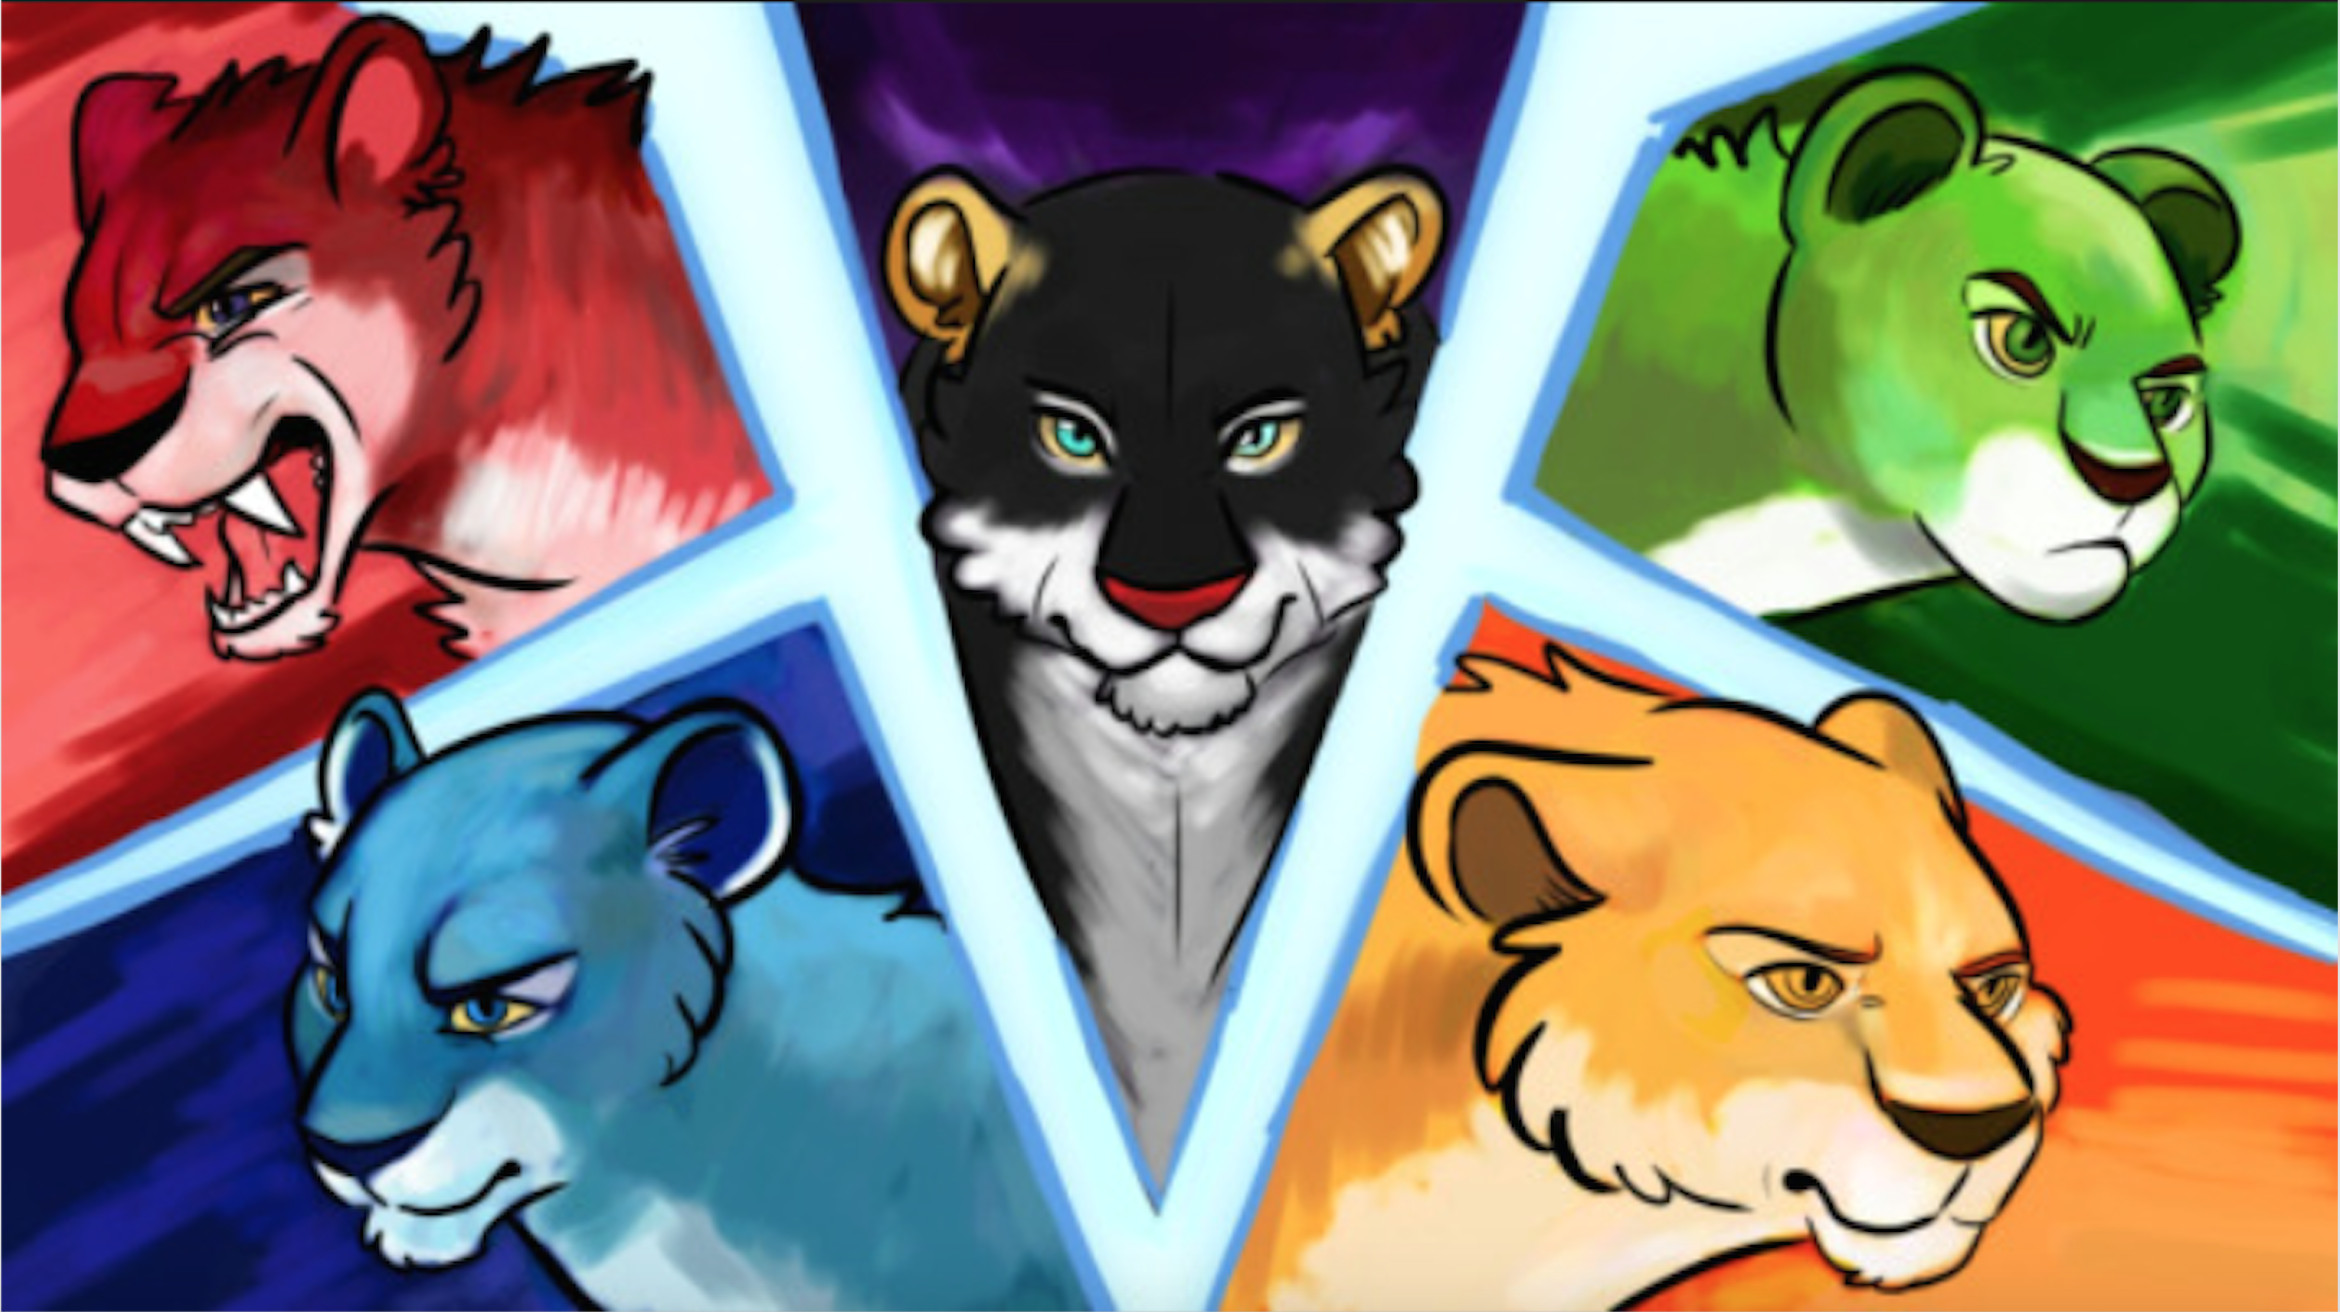 Easy Voltron Drawings the Voltron Lions Red Blue Black Yellow and Green Lions From